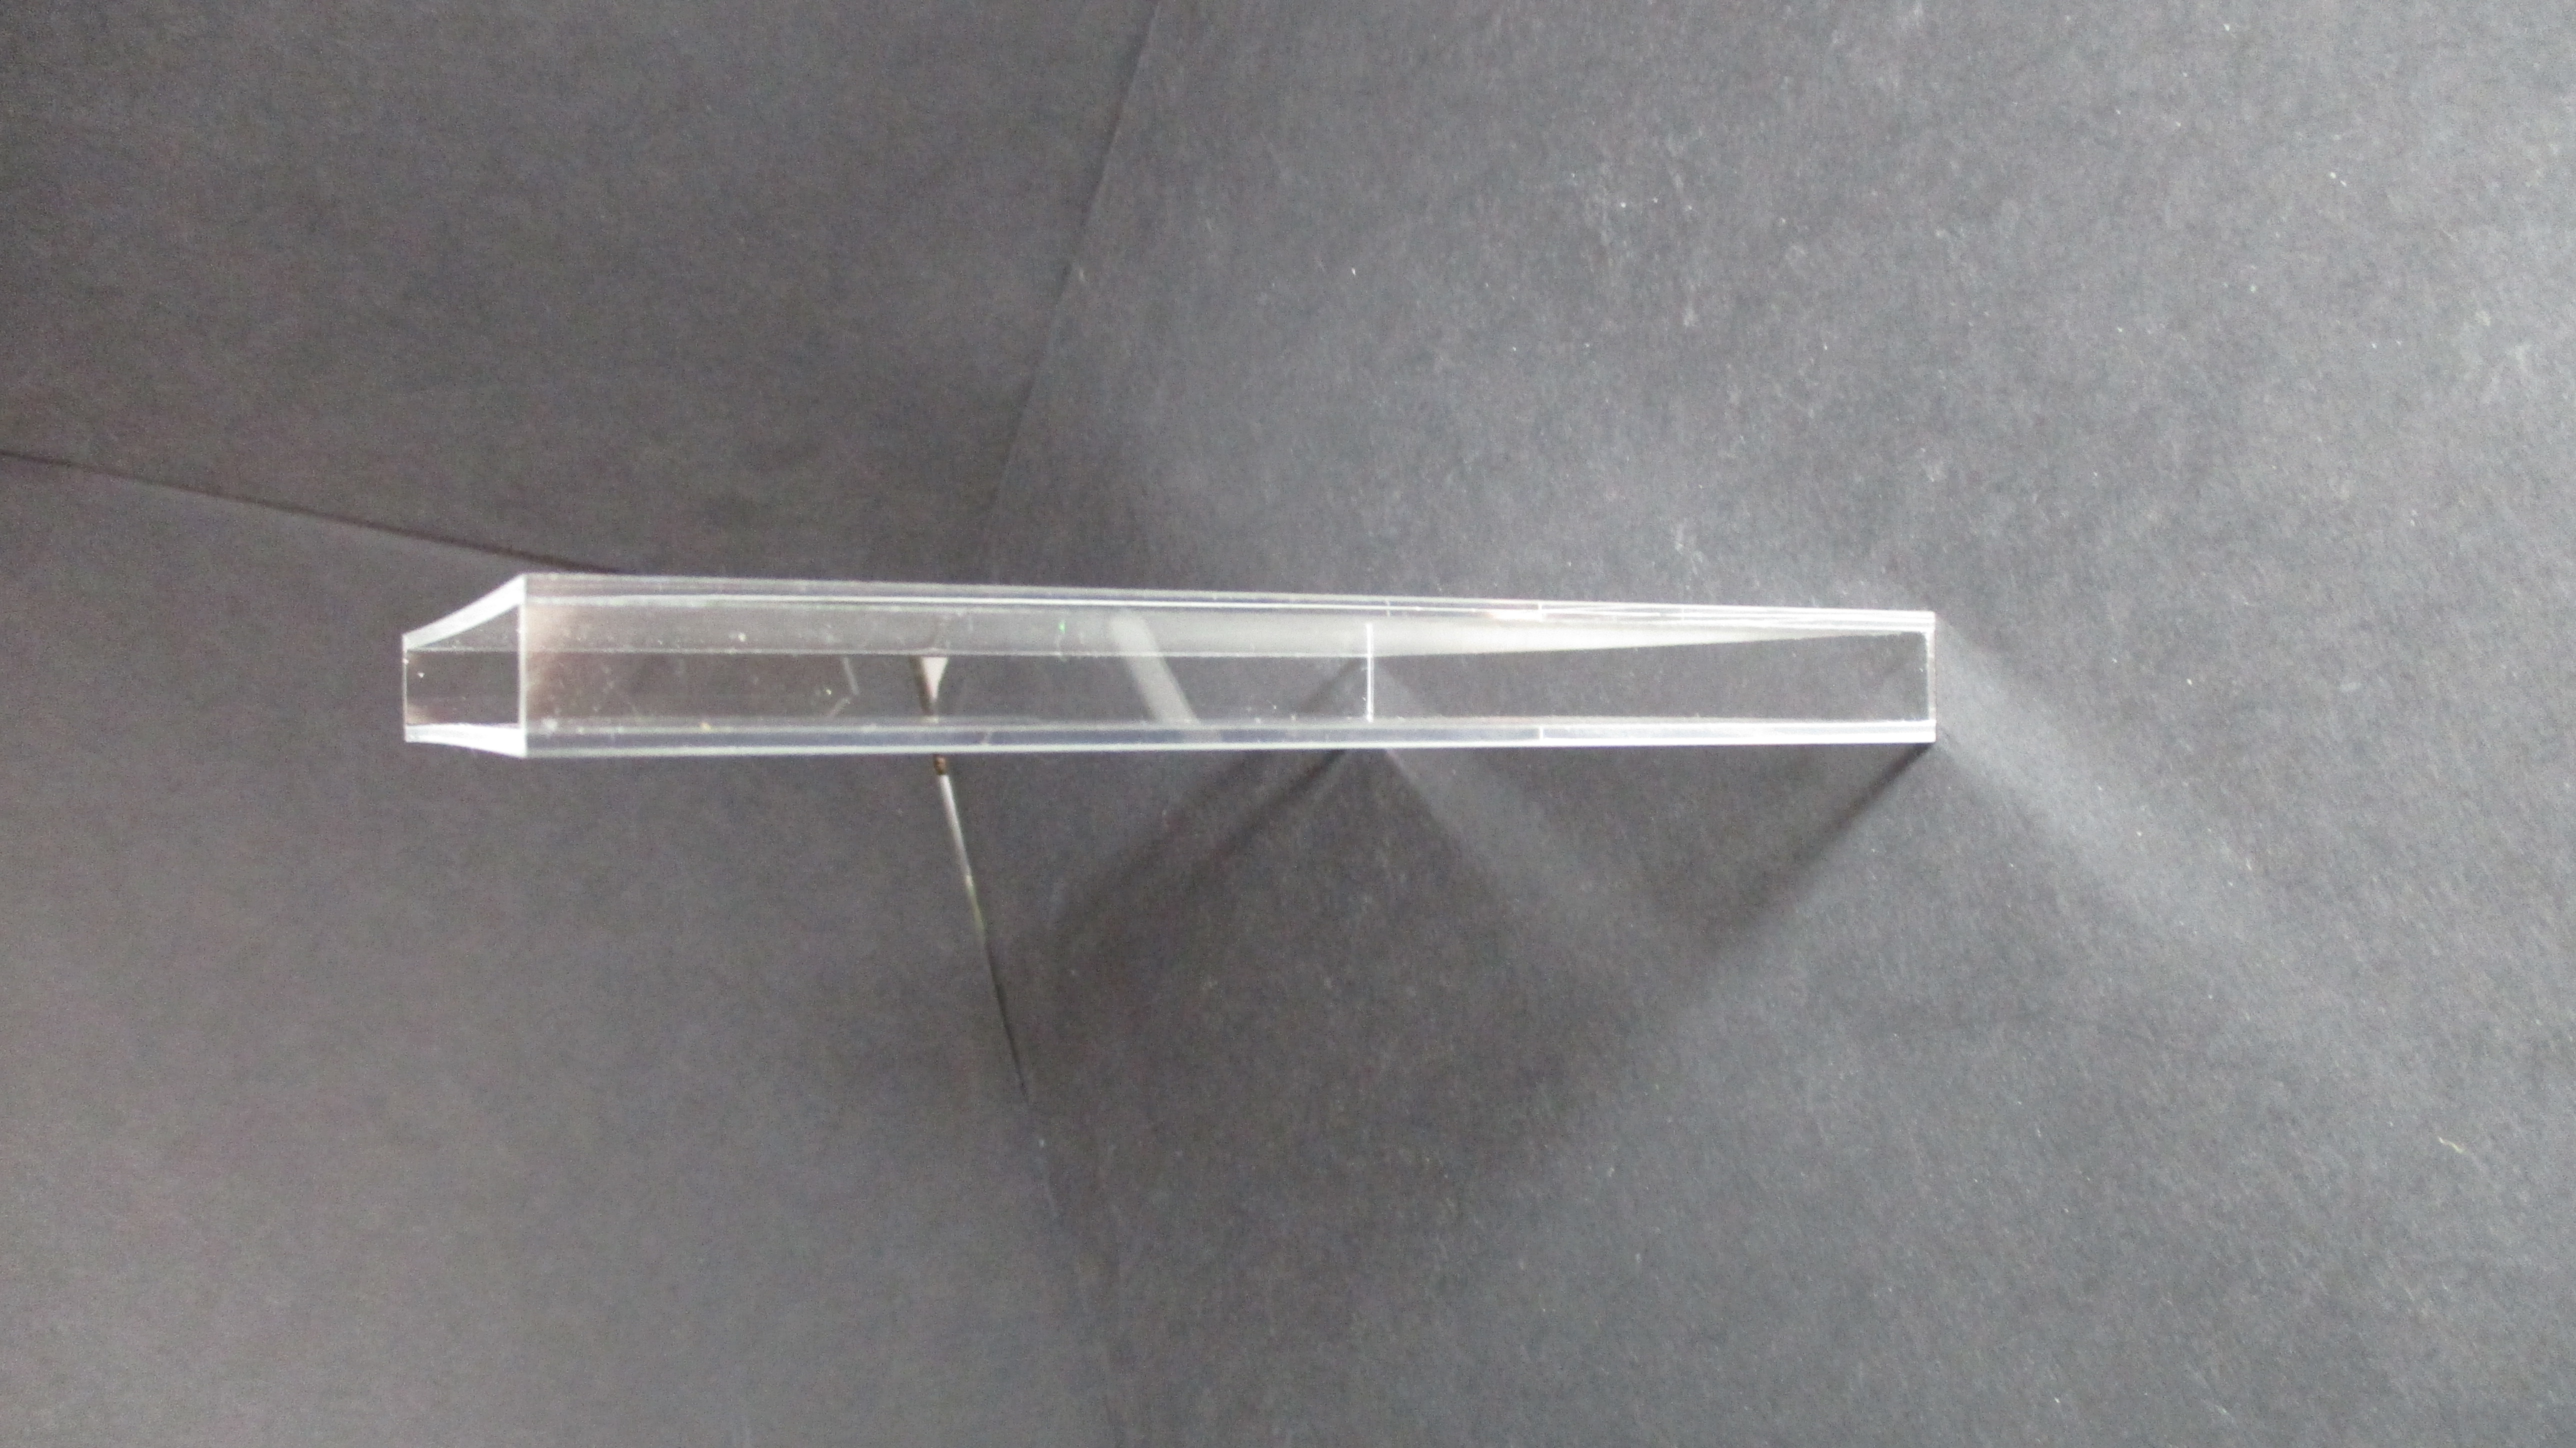 5x PS1 Acrylic Display Guard with Insert (60035)